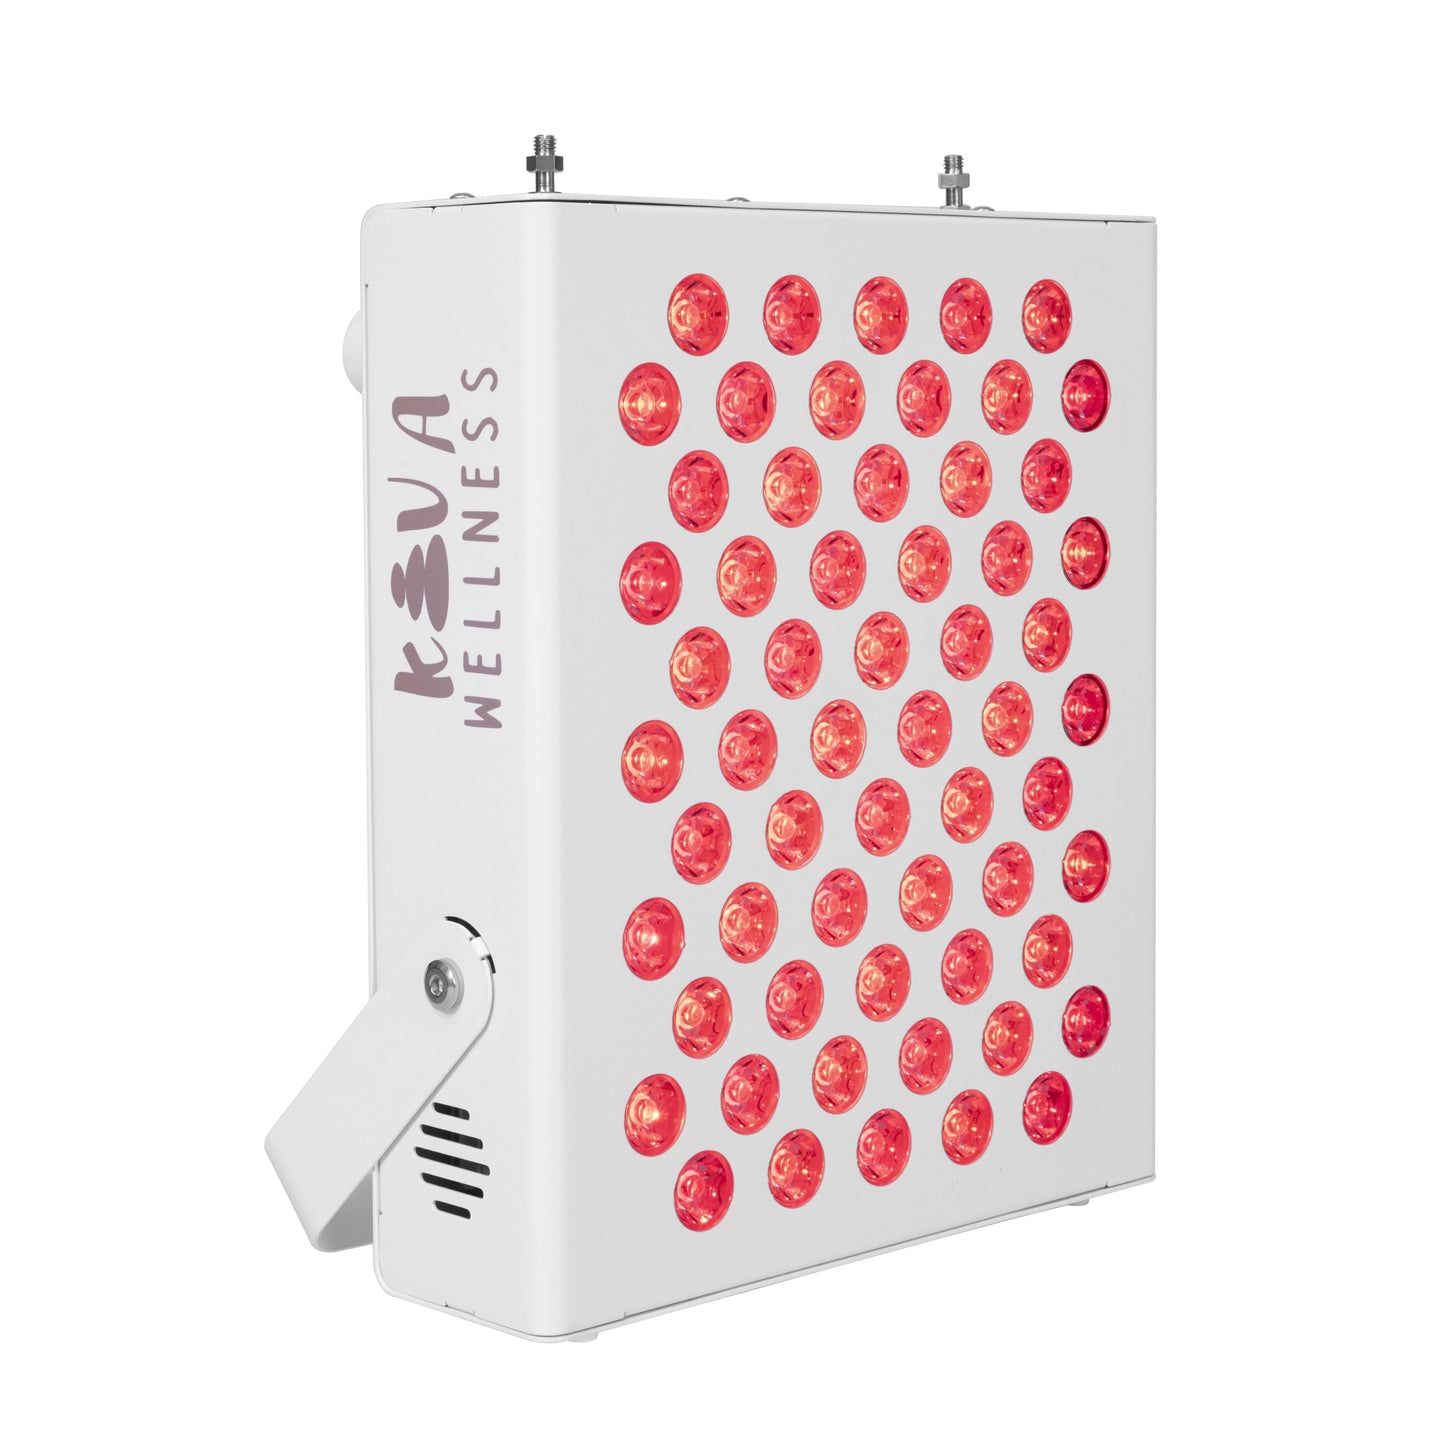 Solace 300 Red Light Therapy Panel